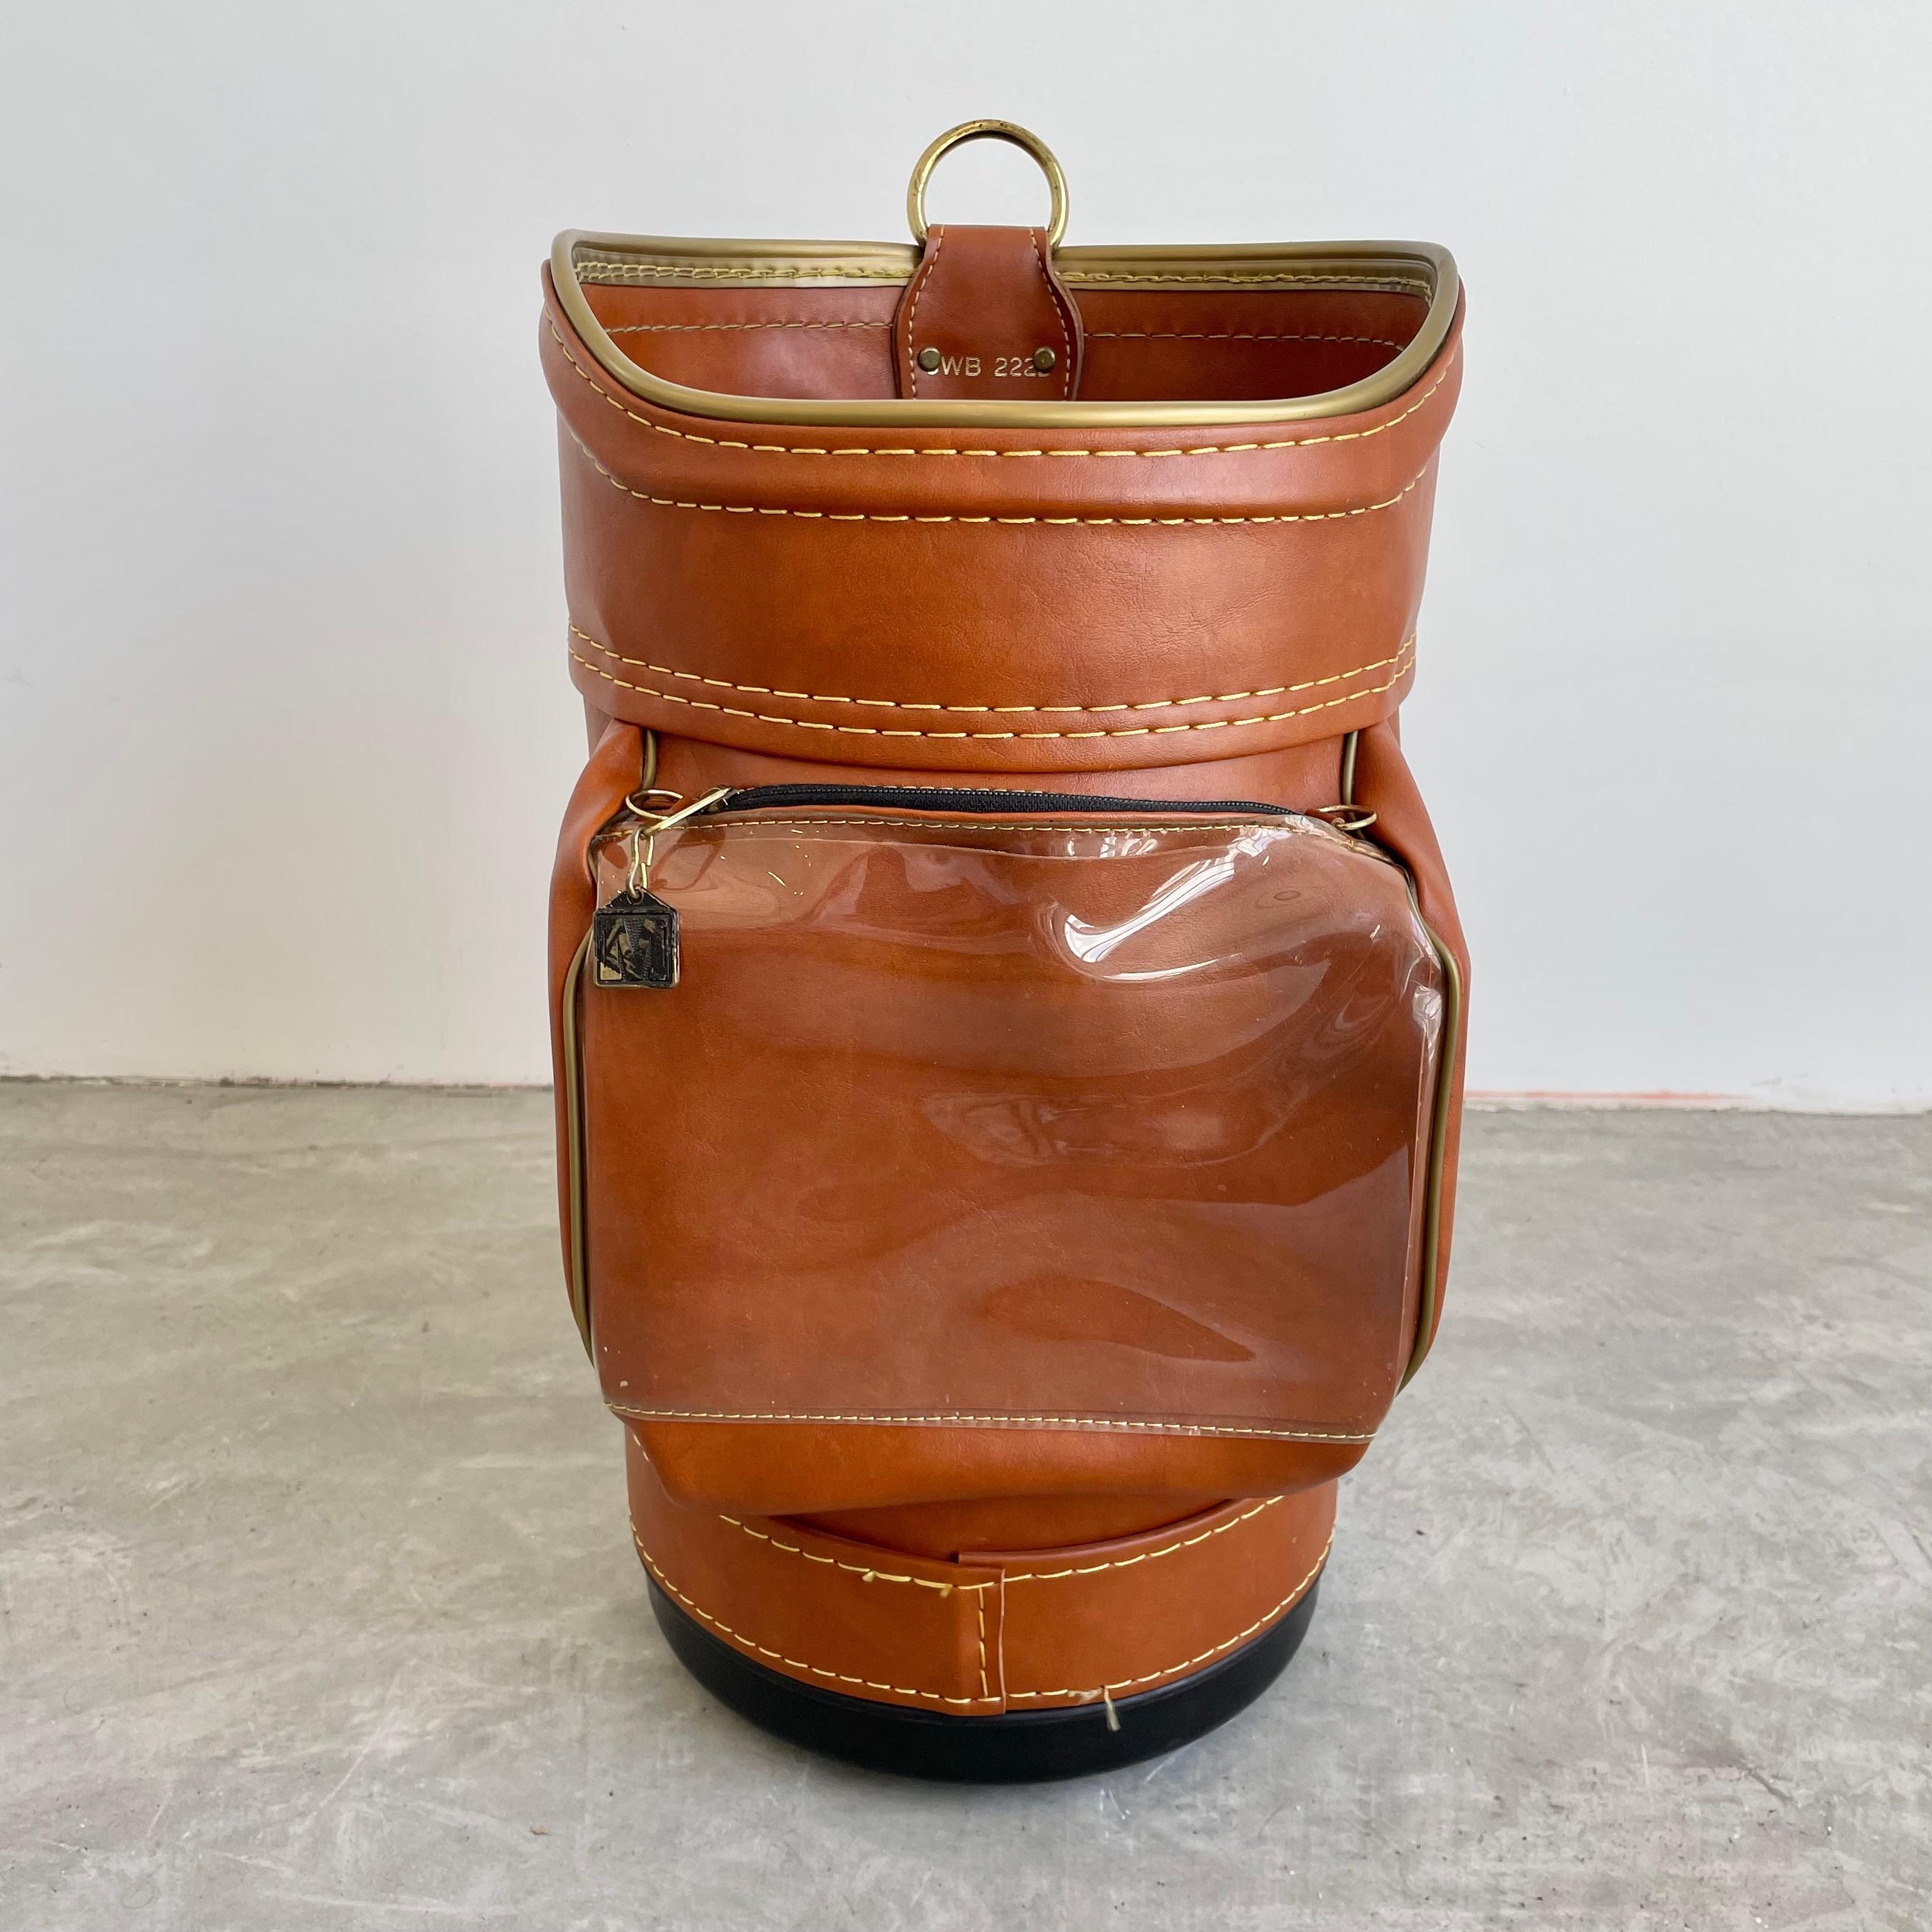 Golf bag waste bin by Miller golf. Made in a synthetic leather and a plastic inner bin with brass hardware throughout. Two functional zipper pockets on front and back. Good vintage condition. Great gift for a golfer.